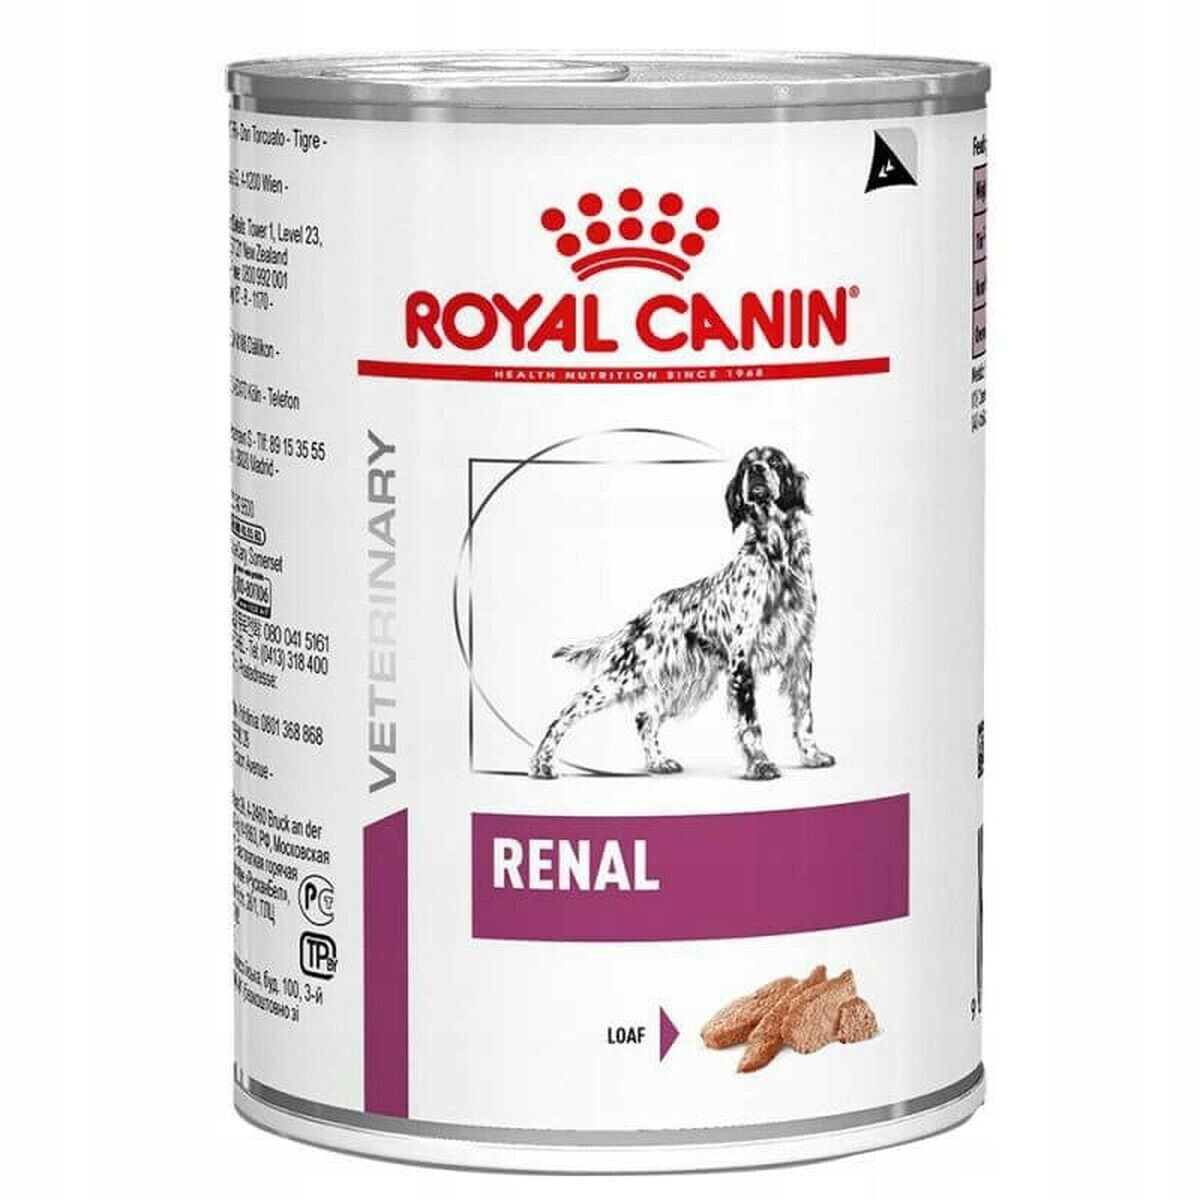 Wet food Royal Canin Renal Chicken Pig 410 g